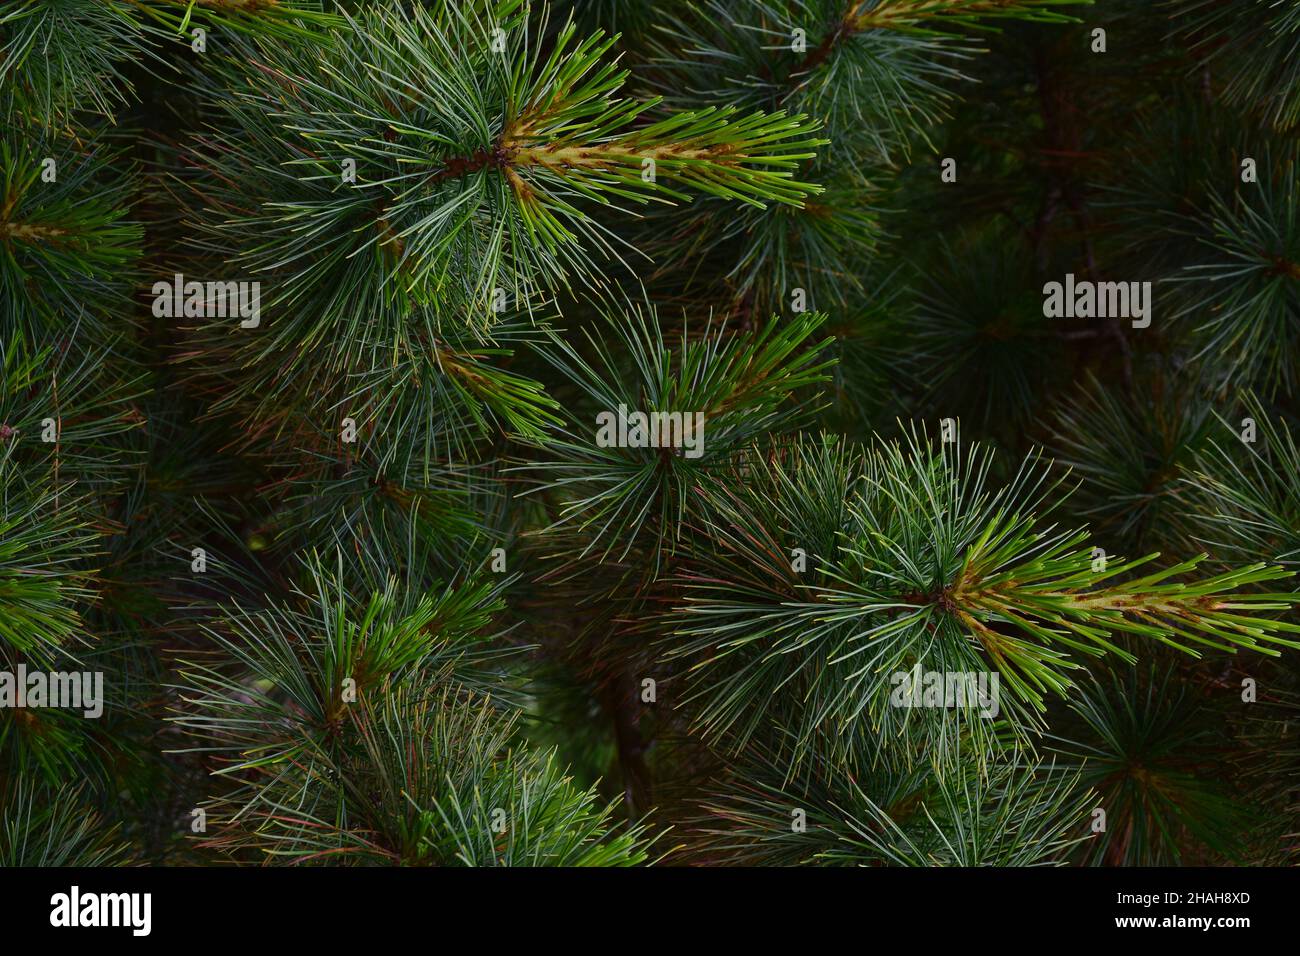 Close-up of pine branches for the whole frame with well-visible large individual needles and beautiful green natural shades Stock Photo